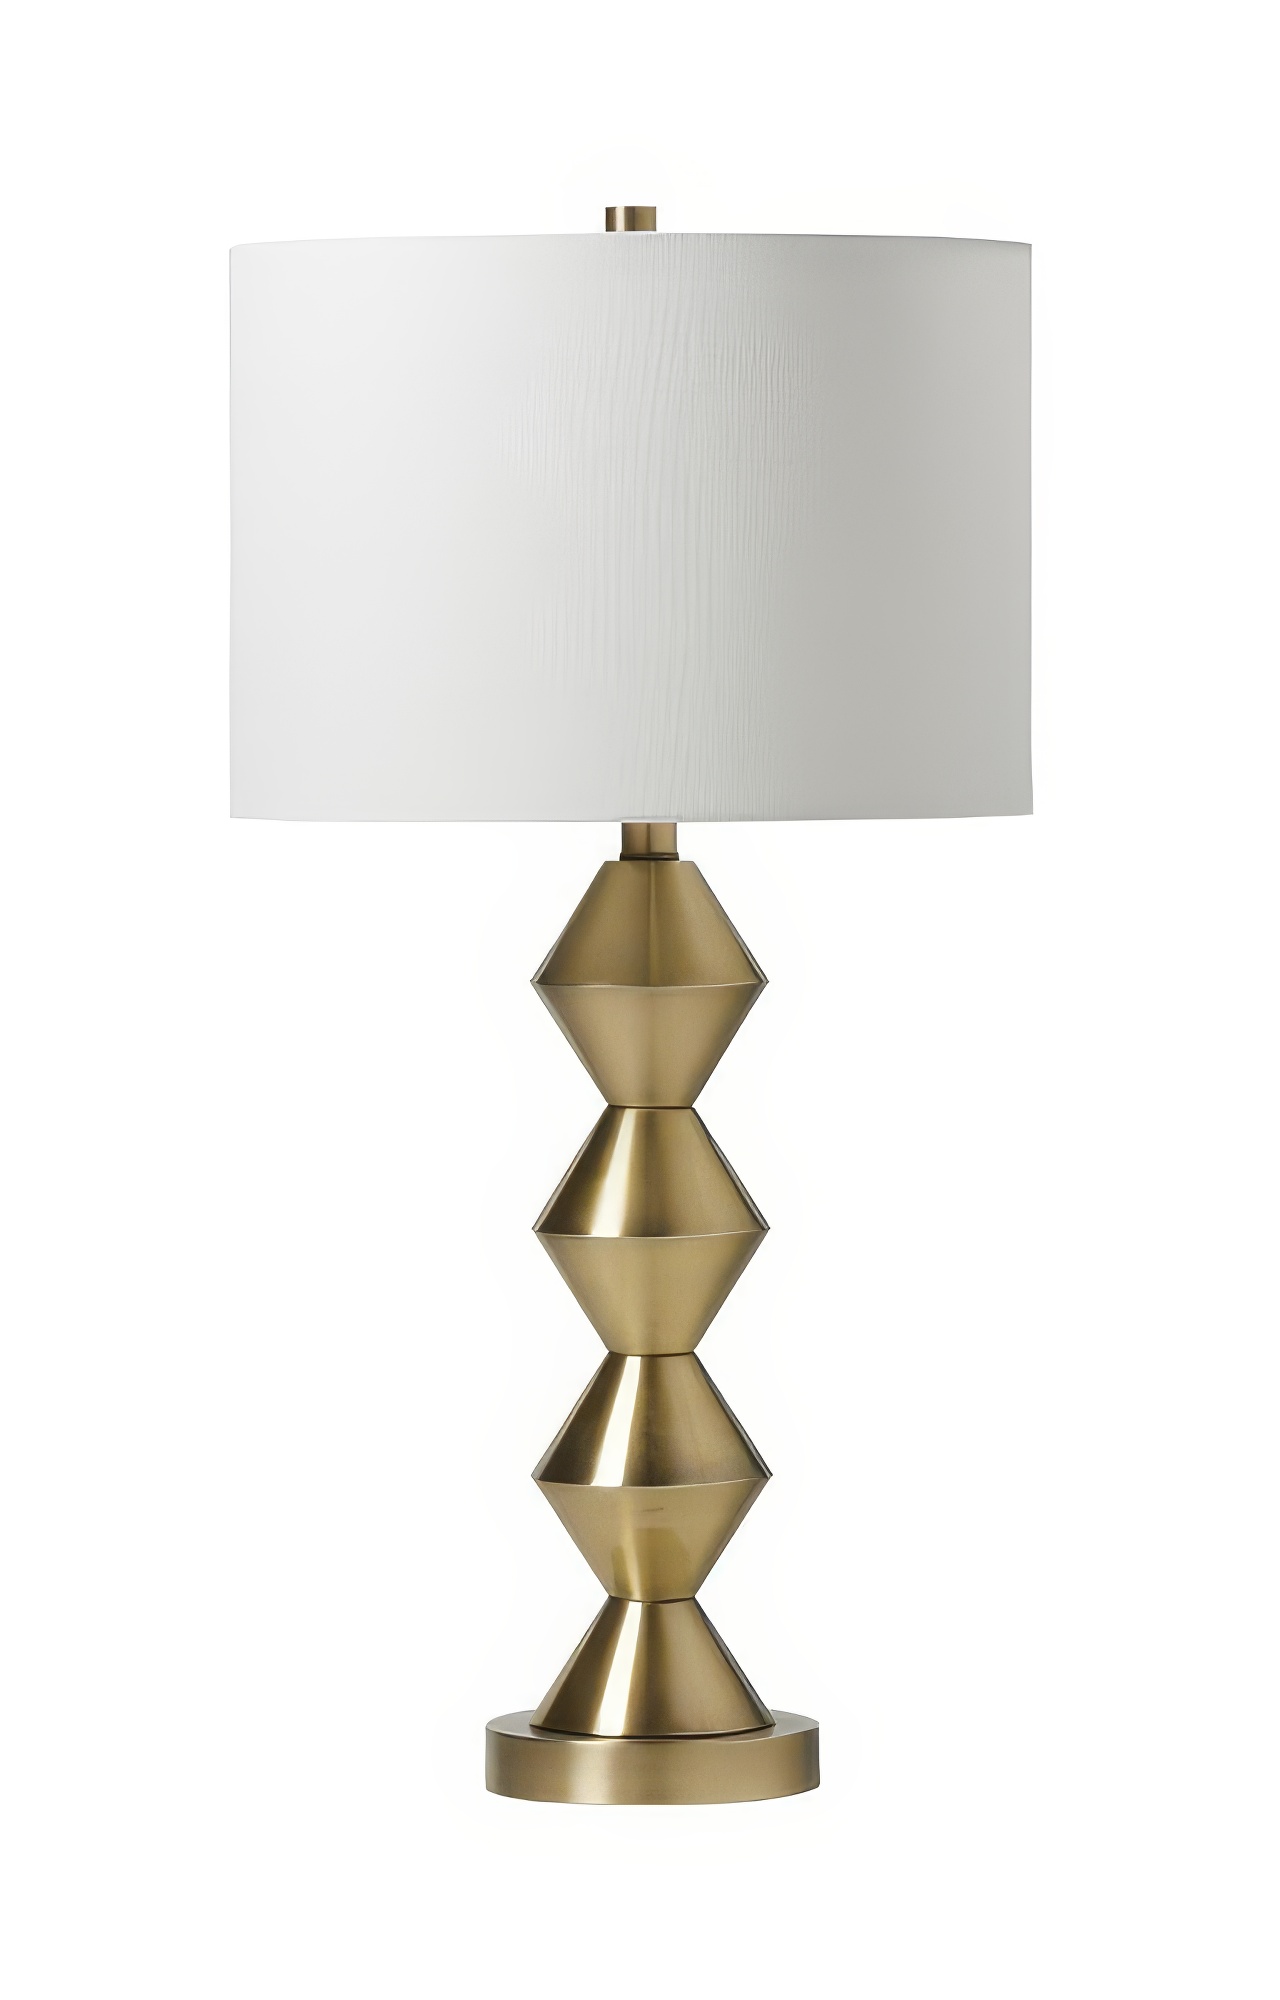 Craftmade 86244 1 Light Plated Metal Base Table Lamp in Satin Brass